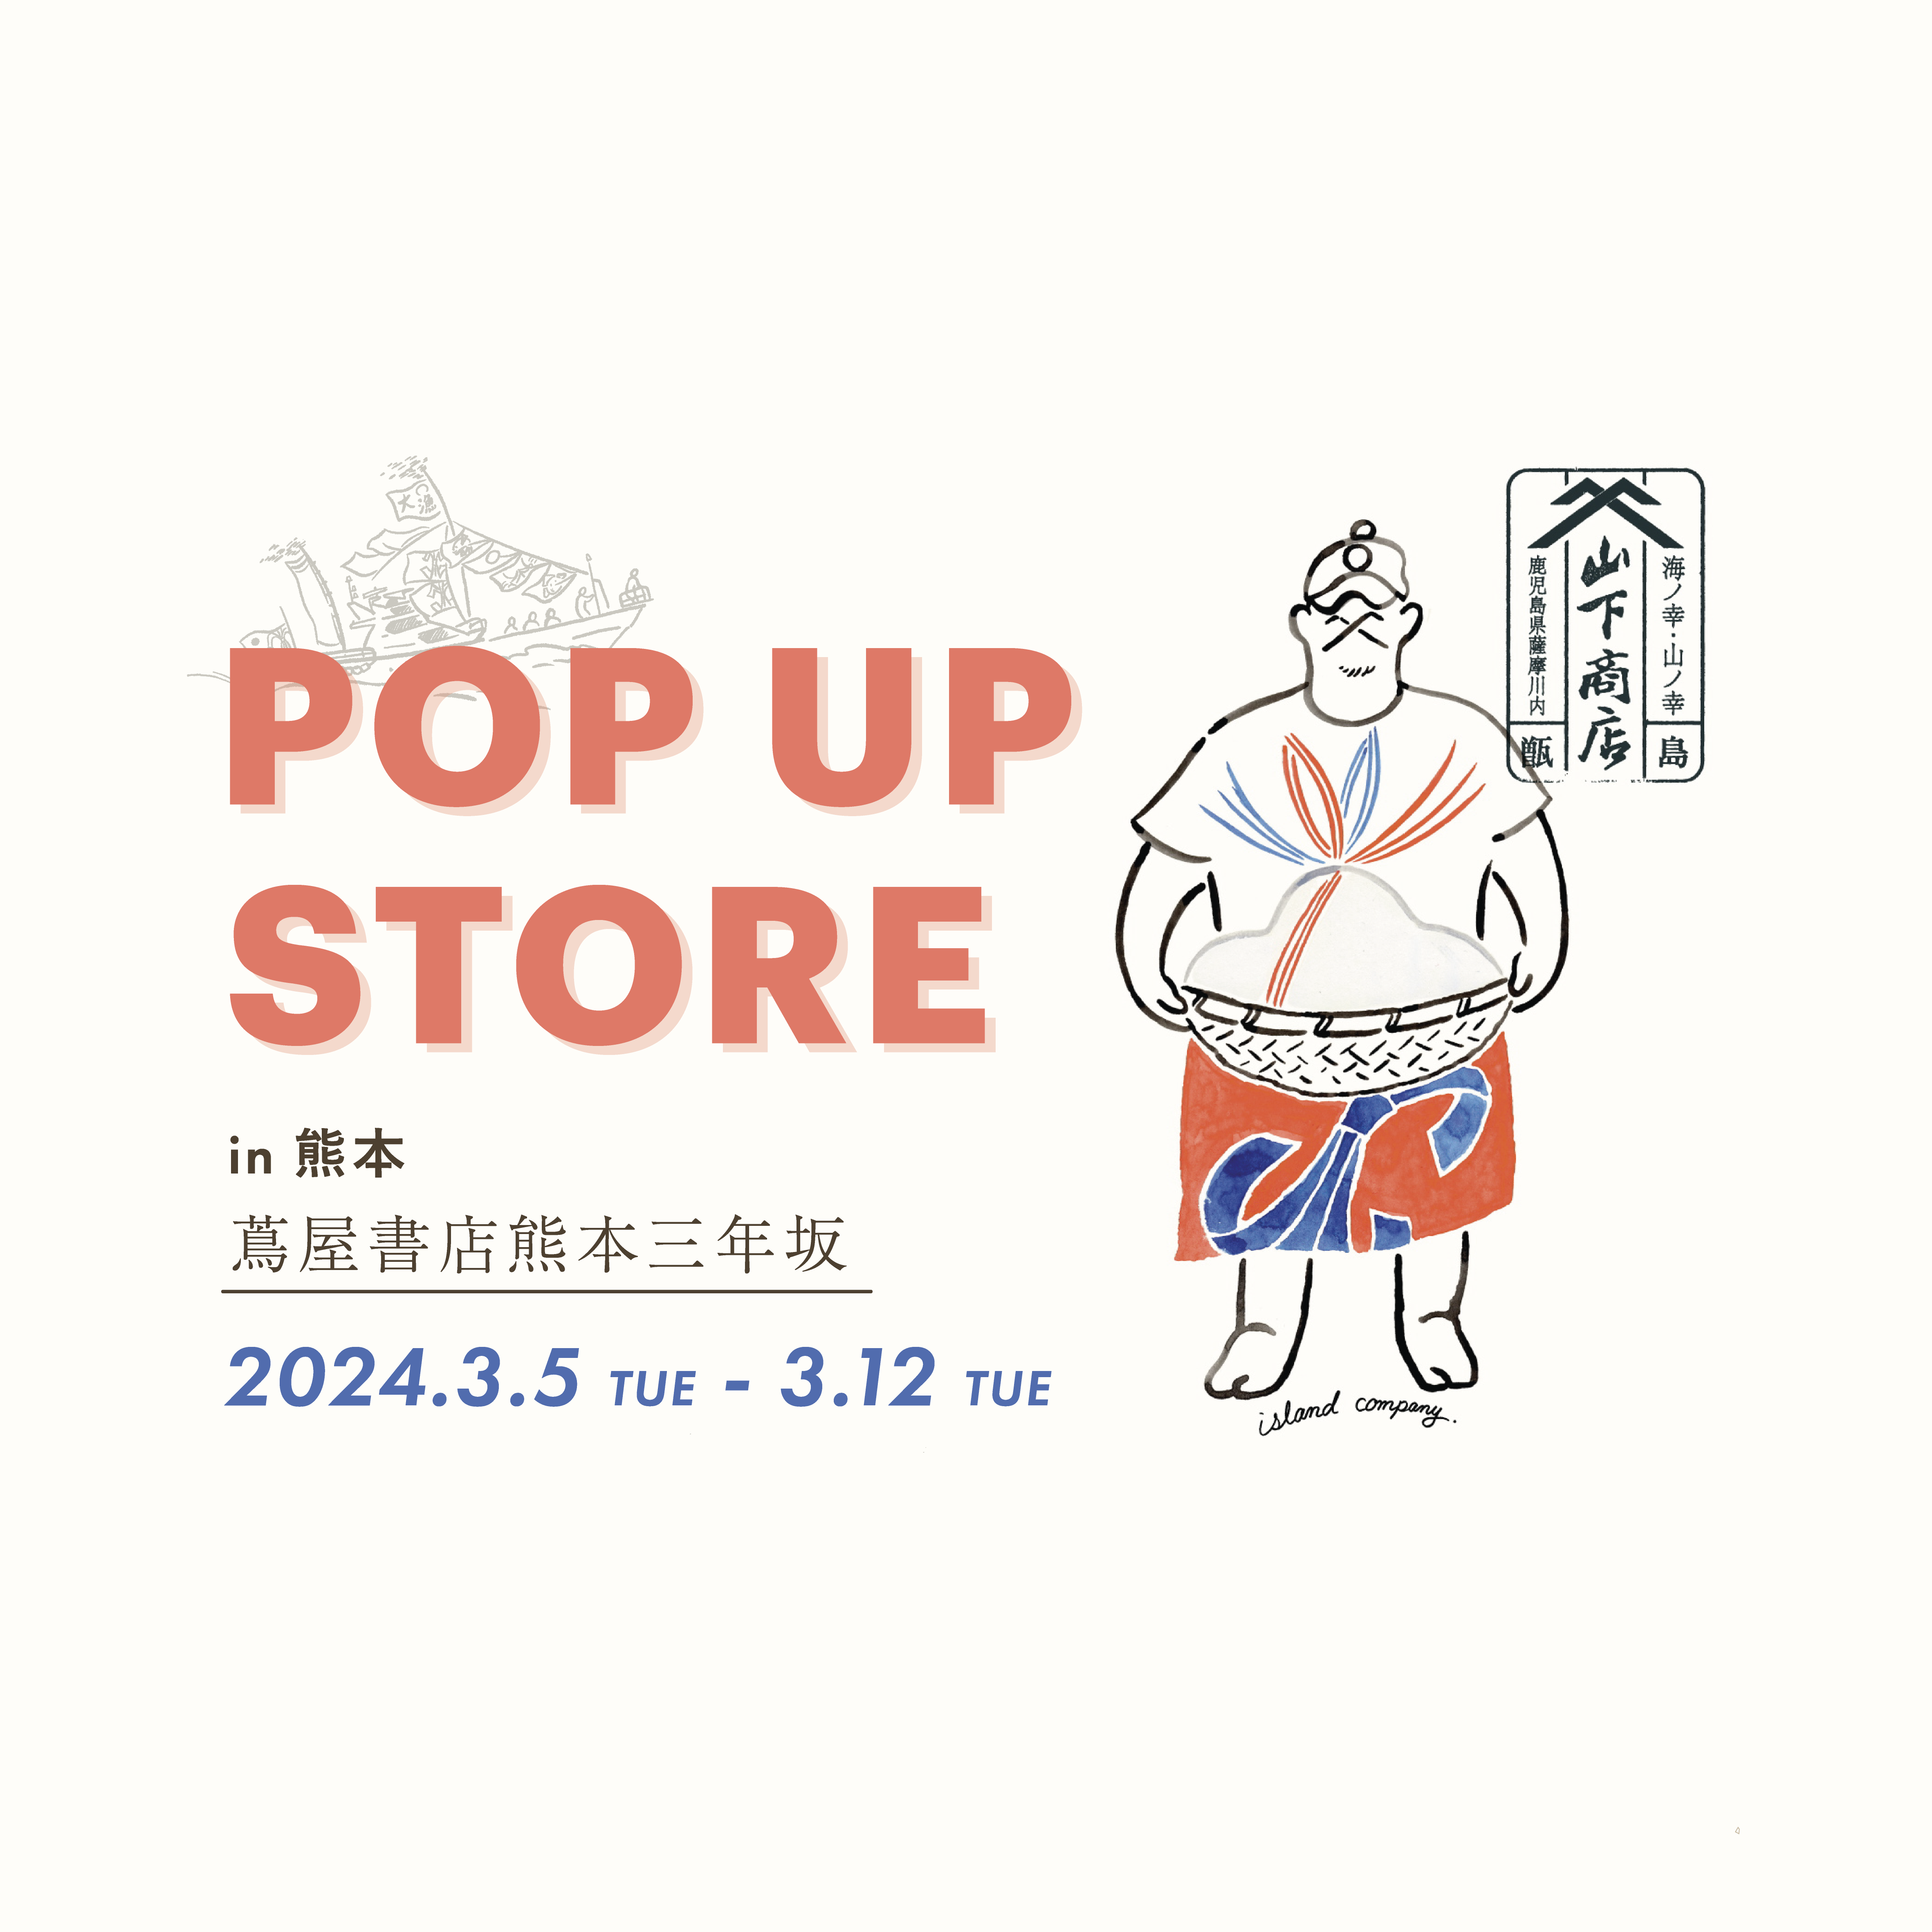 【EVENT】山下商店甑島本店POP UP STORE in 熊本蔦屋三年坂